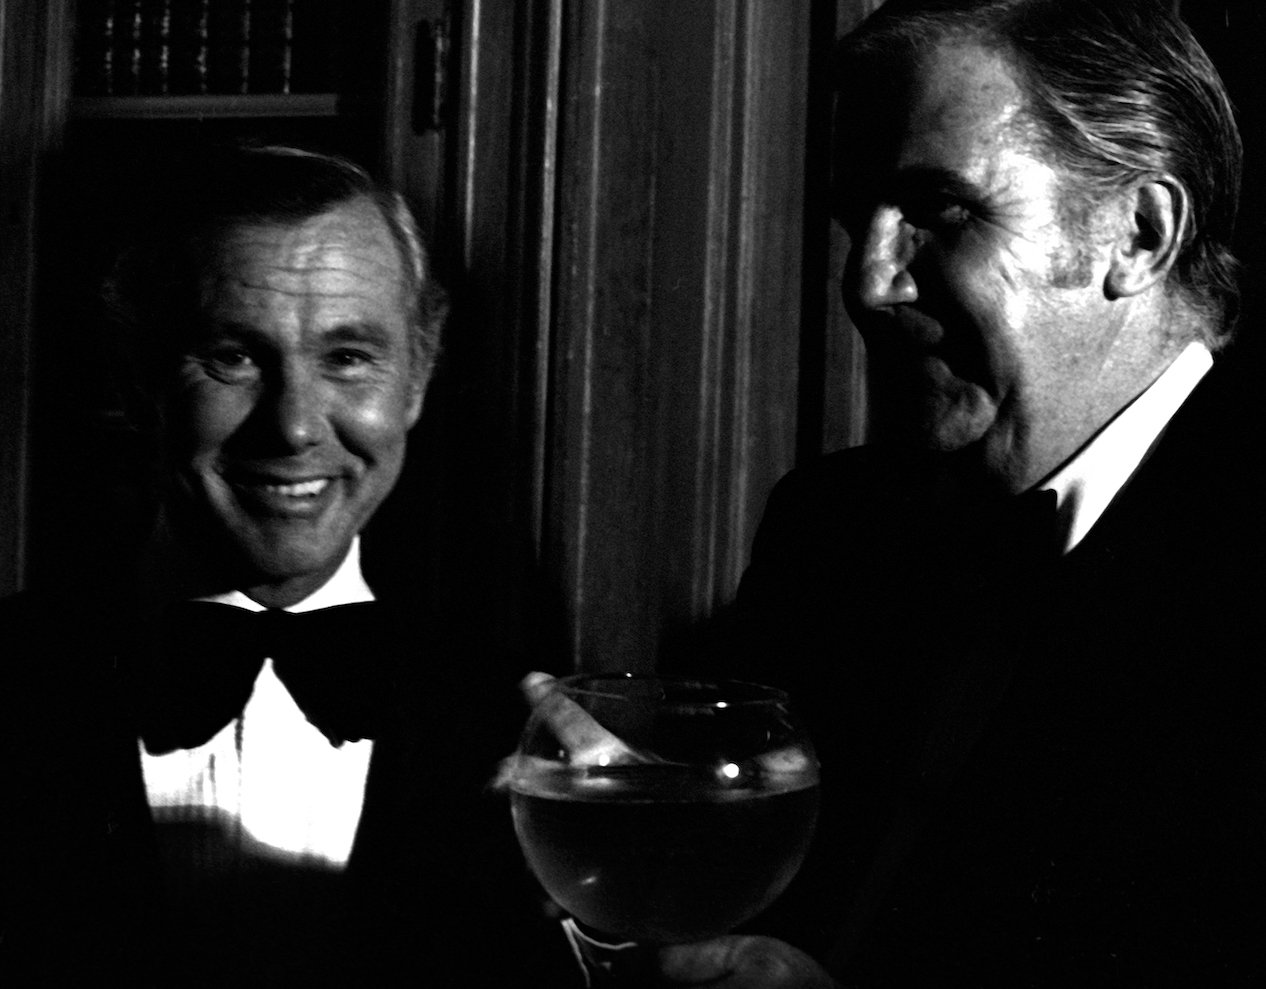 Black and white photo of Johnny Carson and Ed McMahon in tuxedos. McMahon is holding a large wine glass.